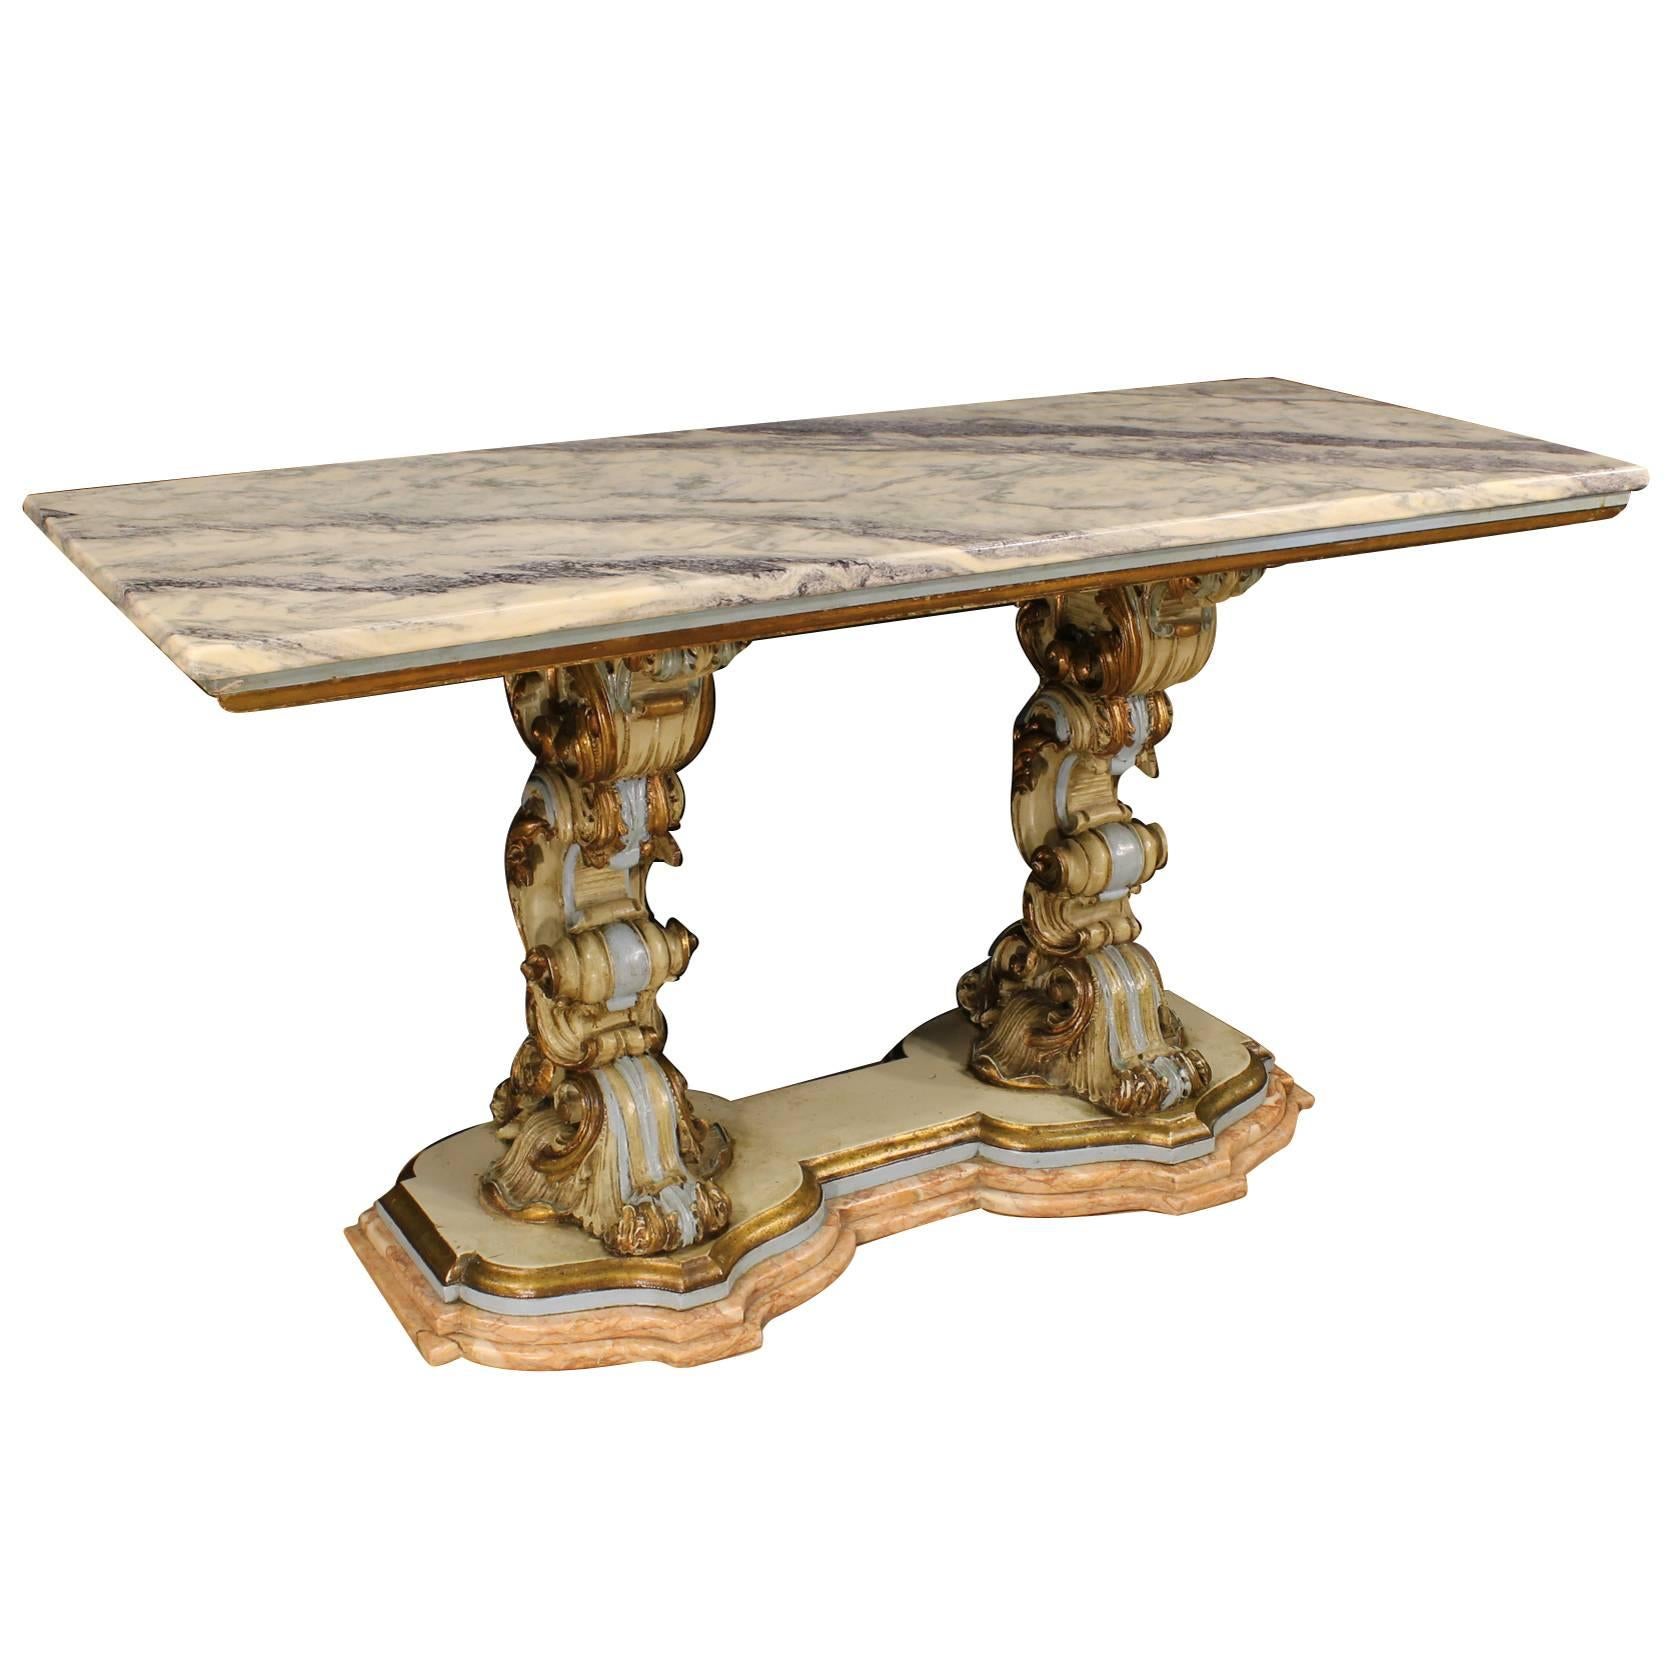 20th Century Console Table Made by Lacquered Wood with Marble Top